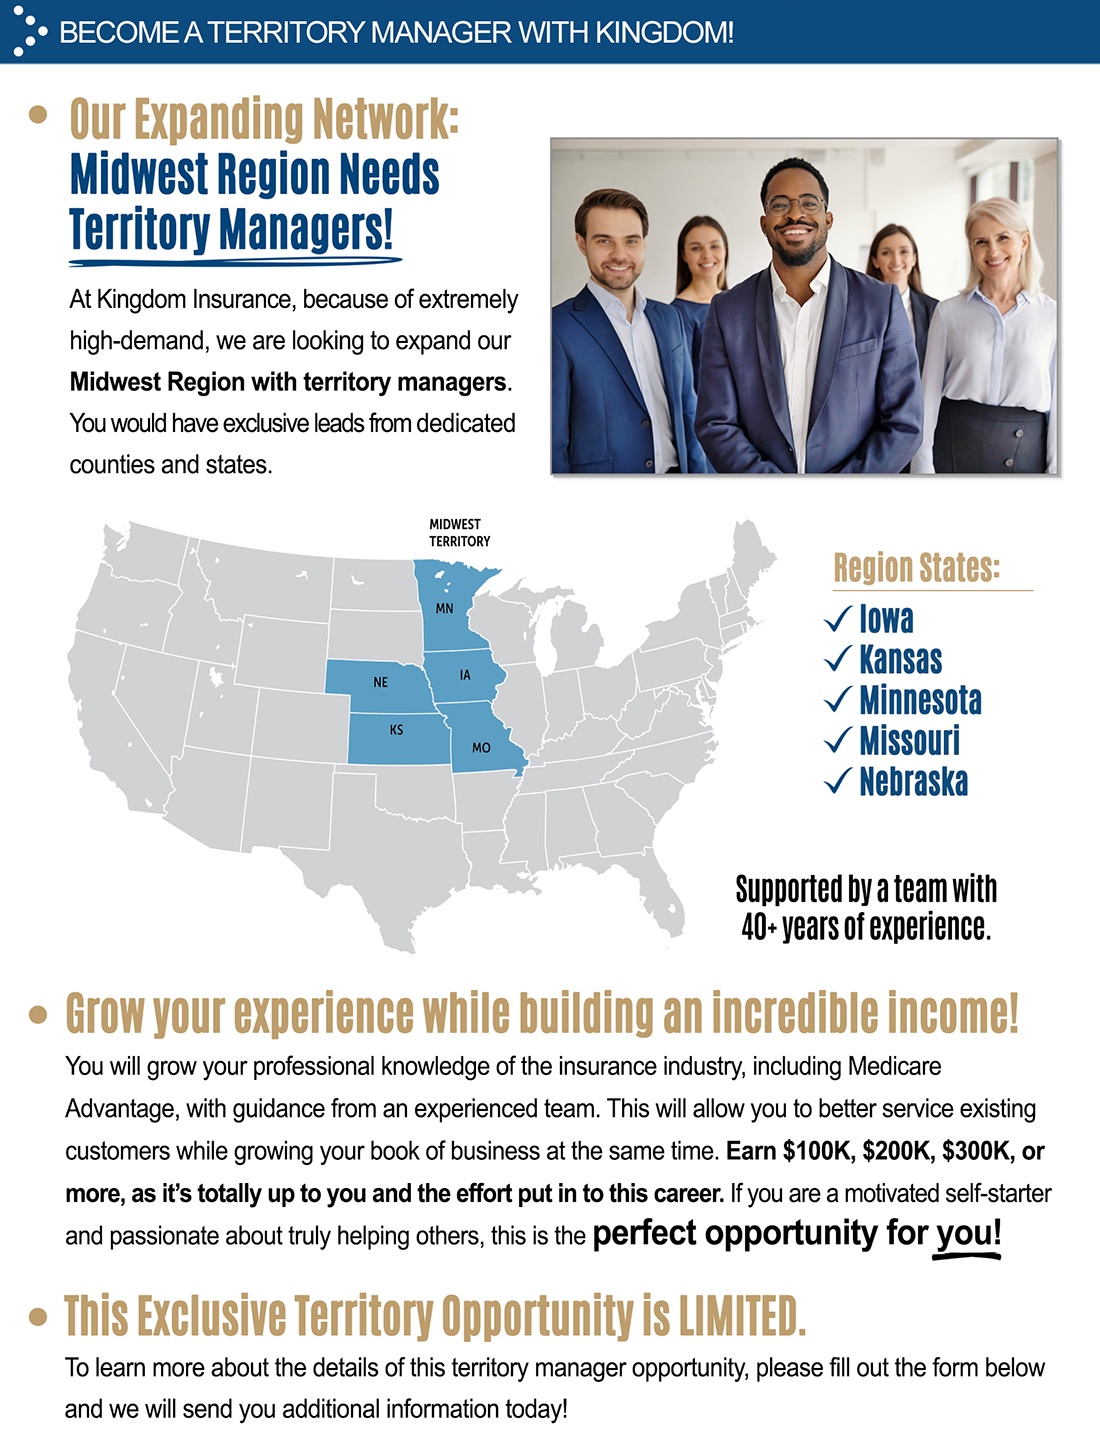 Midwest needs territory managers!